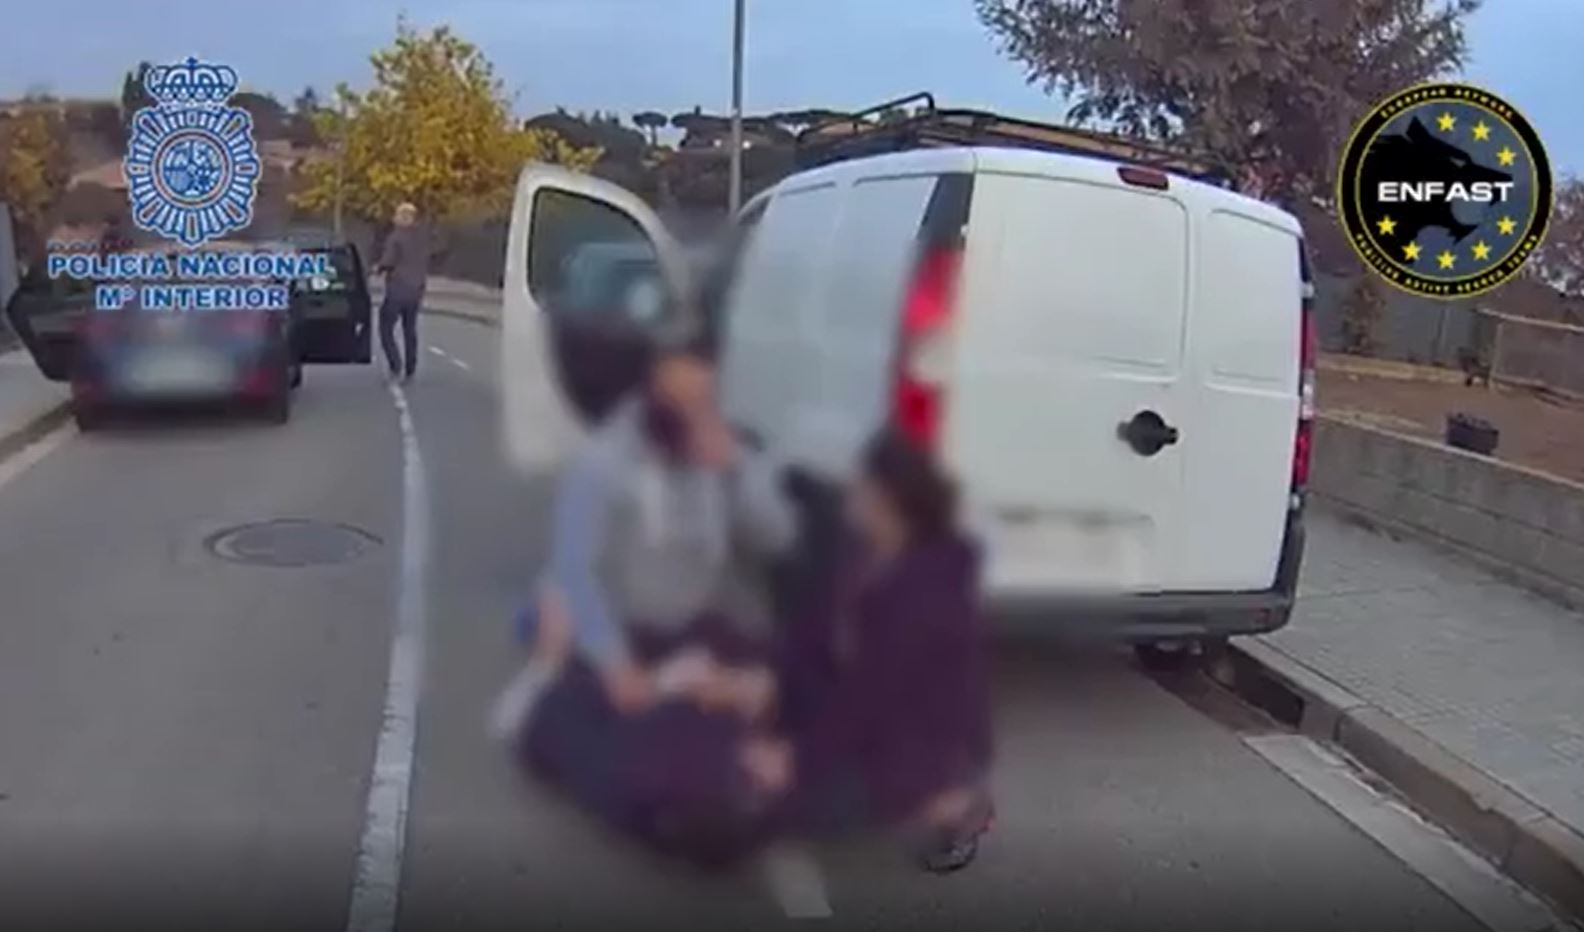 A screenshot of footage of the moment E.K. was arrested near Barcelona (Courtesy of the Spanish National Police)